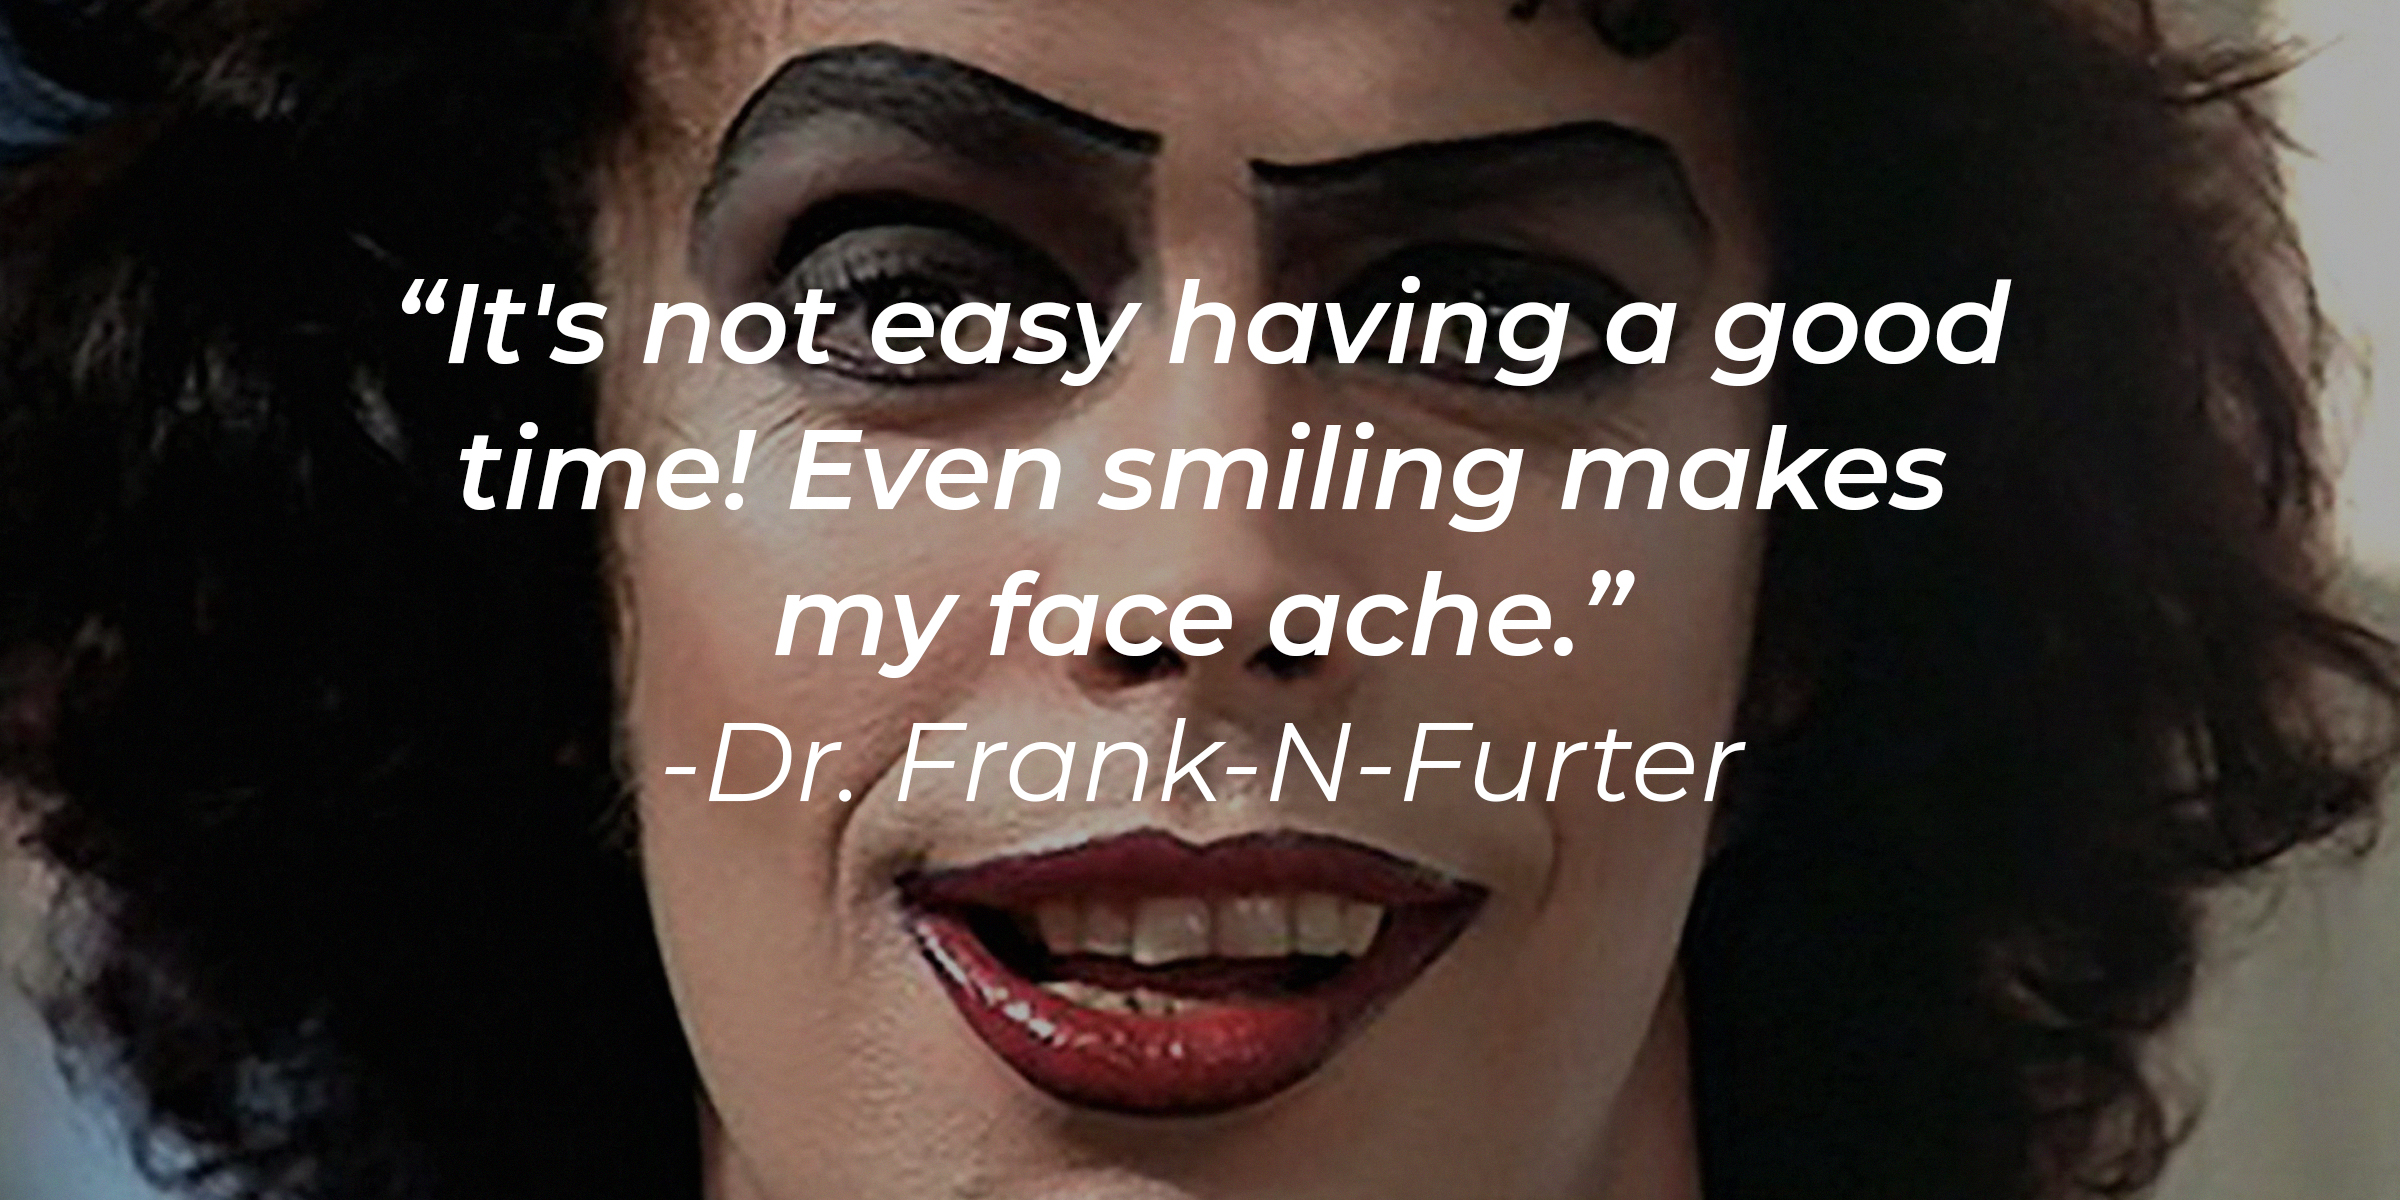 Dr. Frank-N-Furter's quote: "It's not easy having a good time! Even smiling makes my face ache." | Source:Facebook/TheRockyHorrorPictureShowOfficial